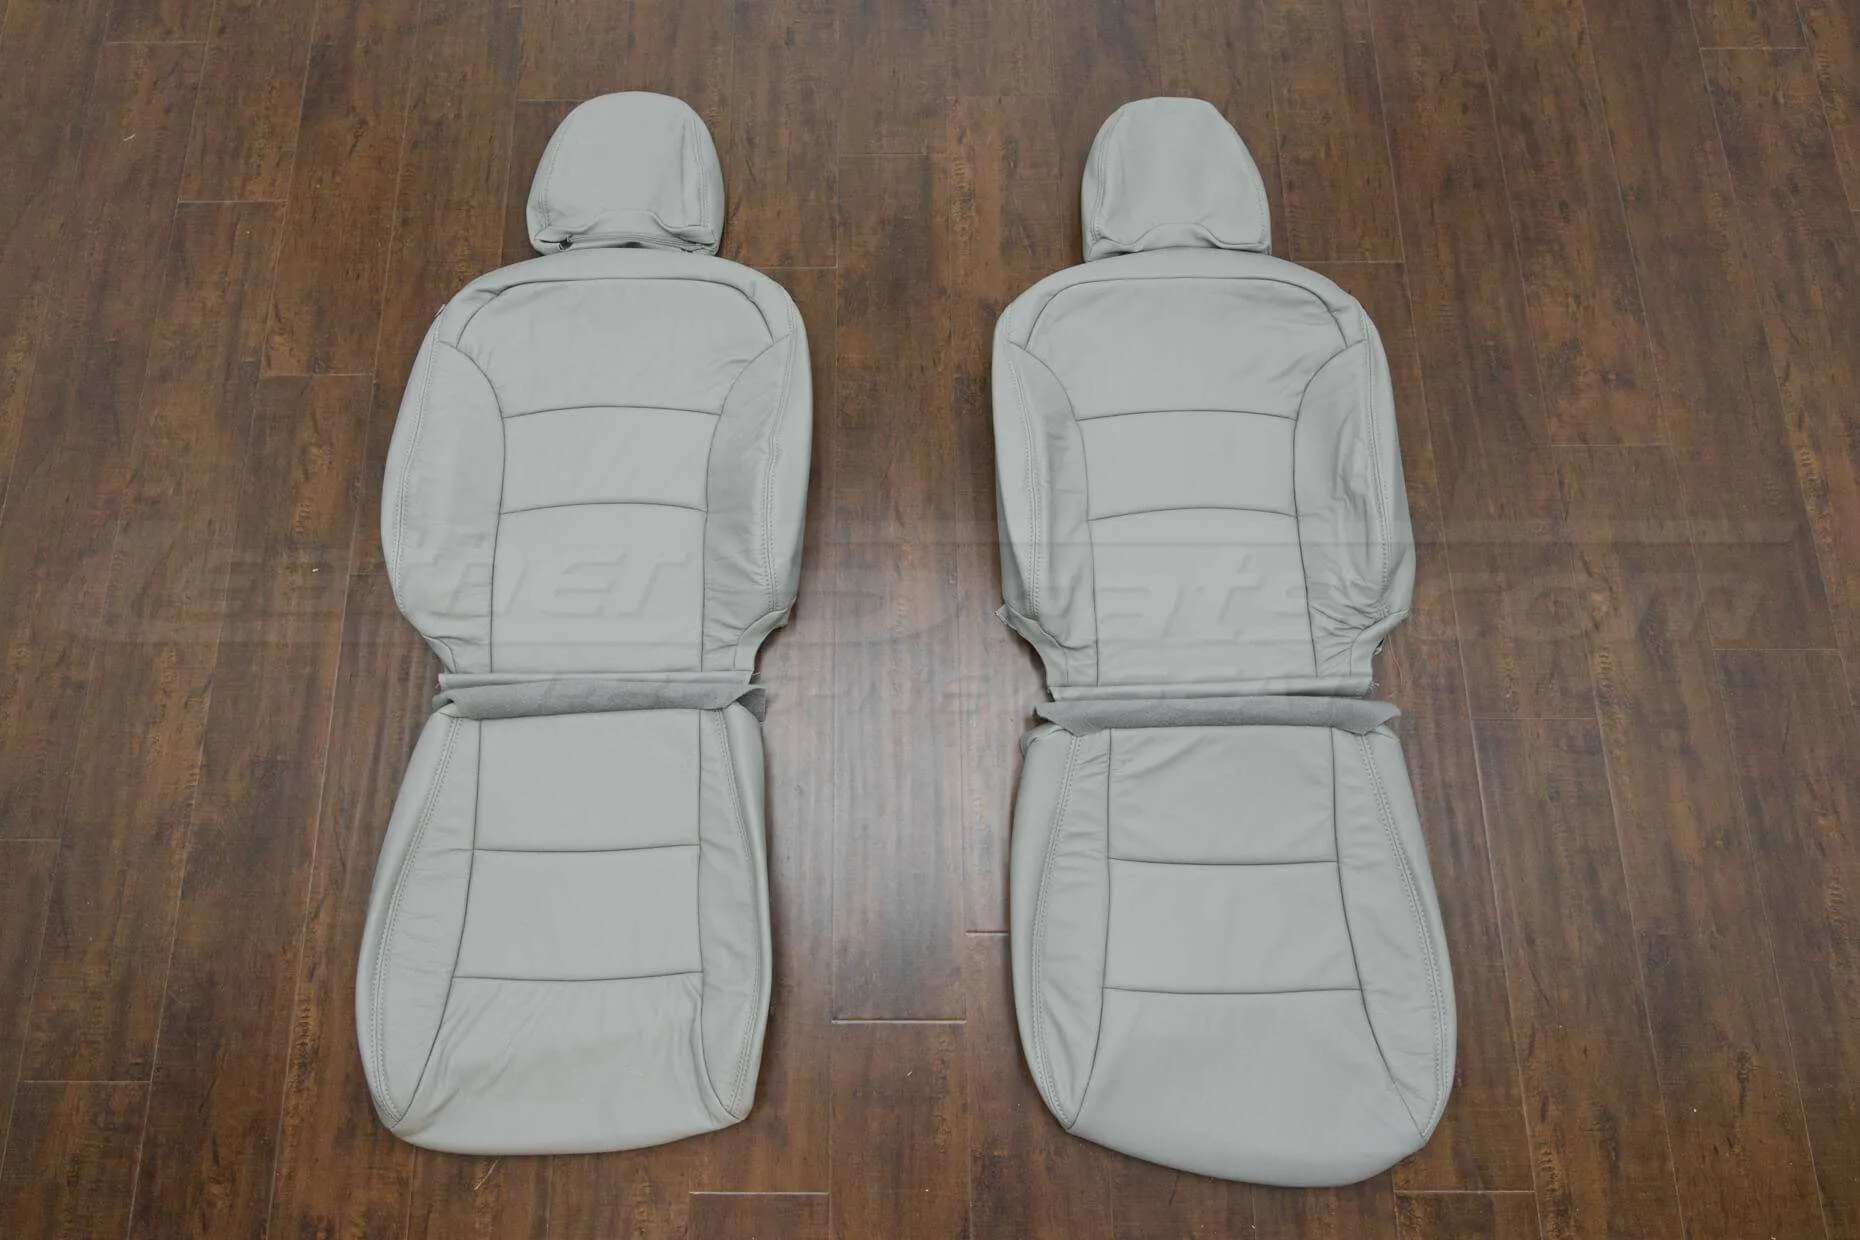 2011-2013 Subaru Forester Leather Seats - Ash - Front seat upholstery